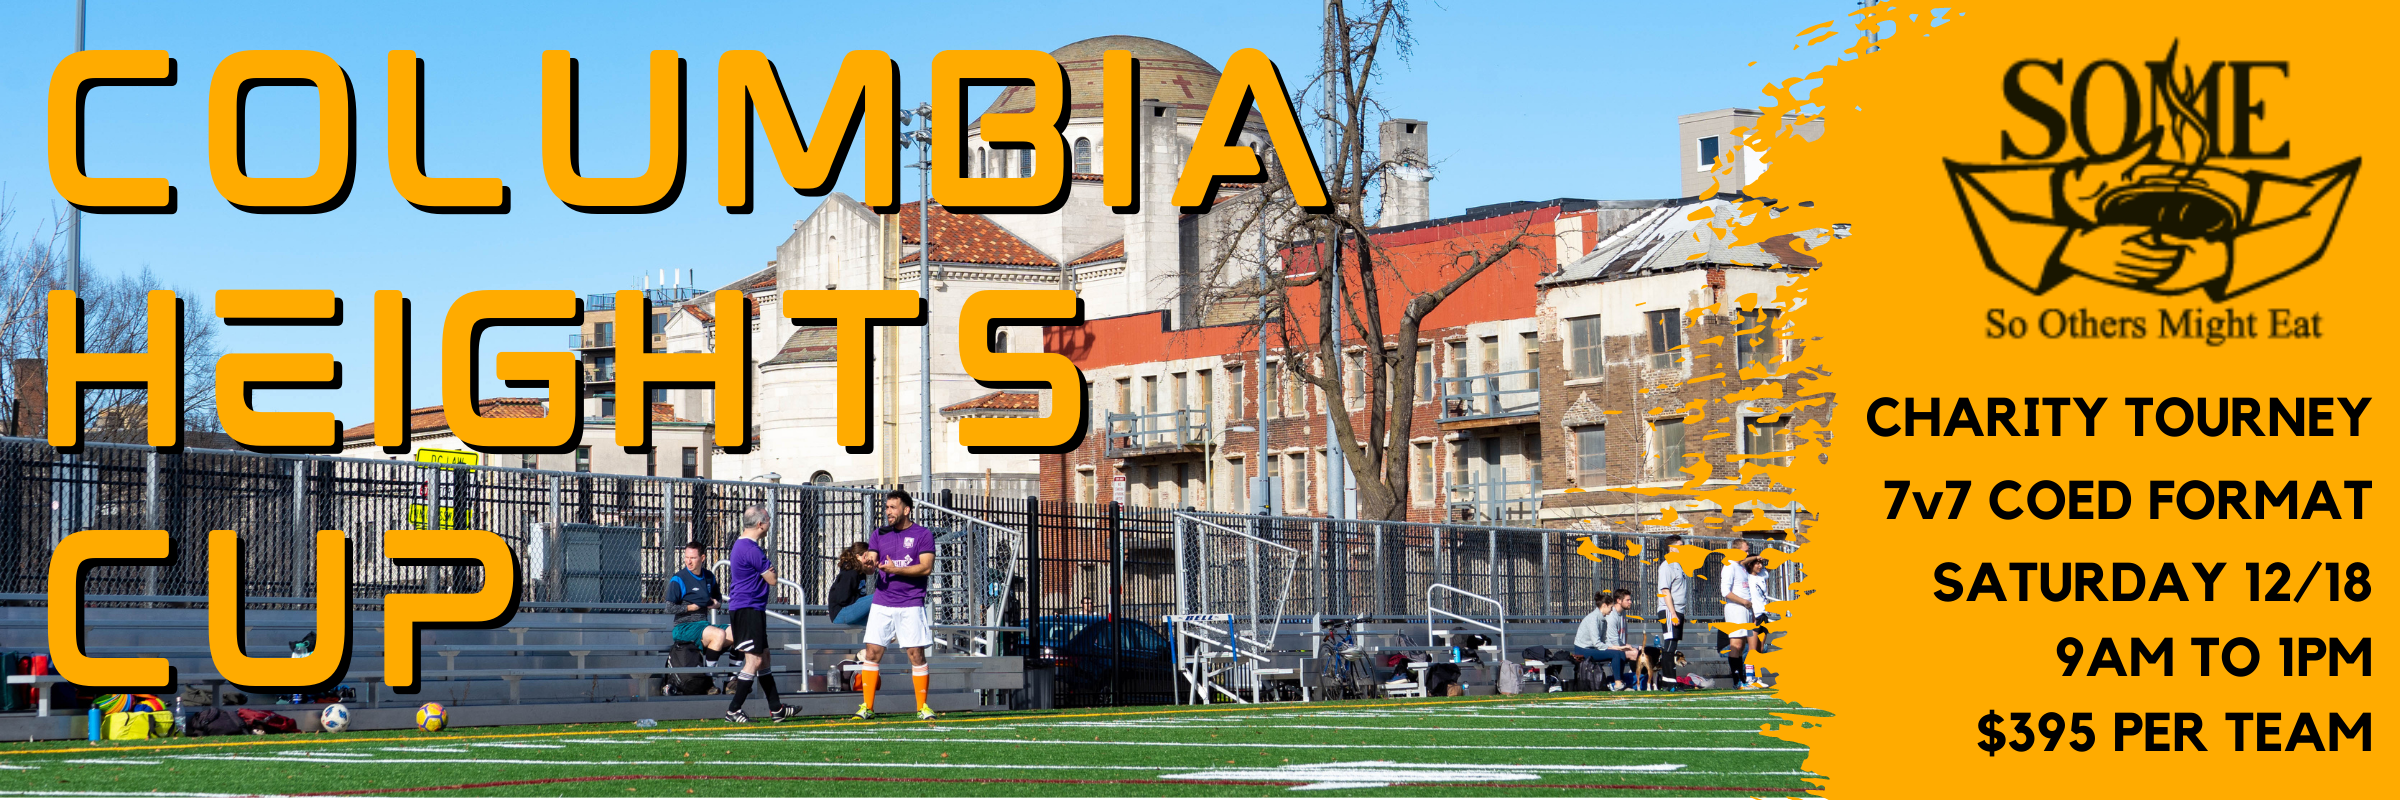 The COLUMBIA HEIGHTS CUP is Back!